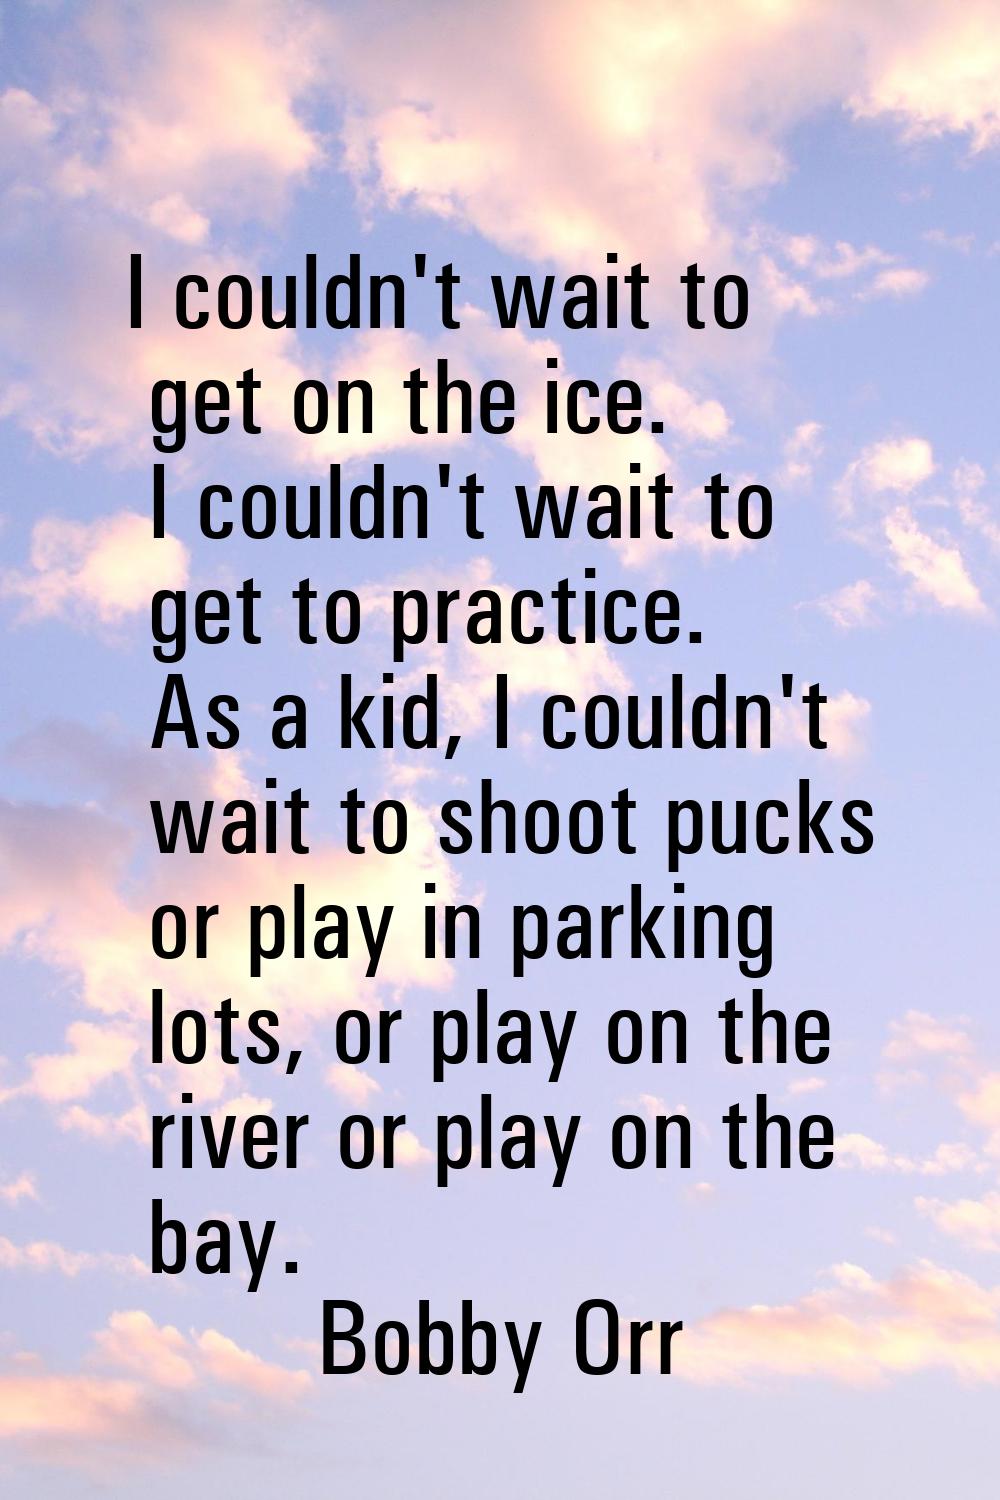 I couldn't wait to get on the ice. I couldn't wait to get to practice. As a kid, I couldn't wait to